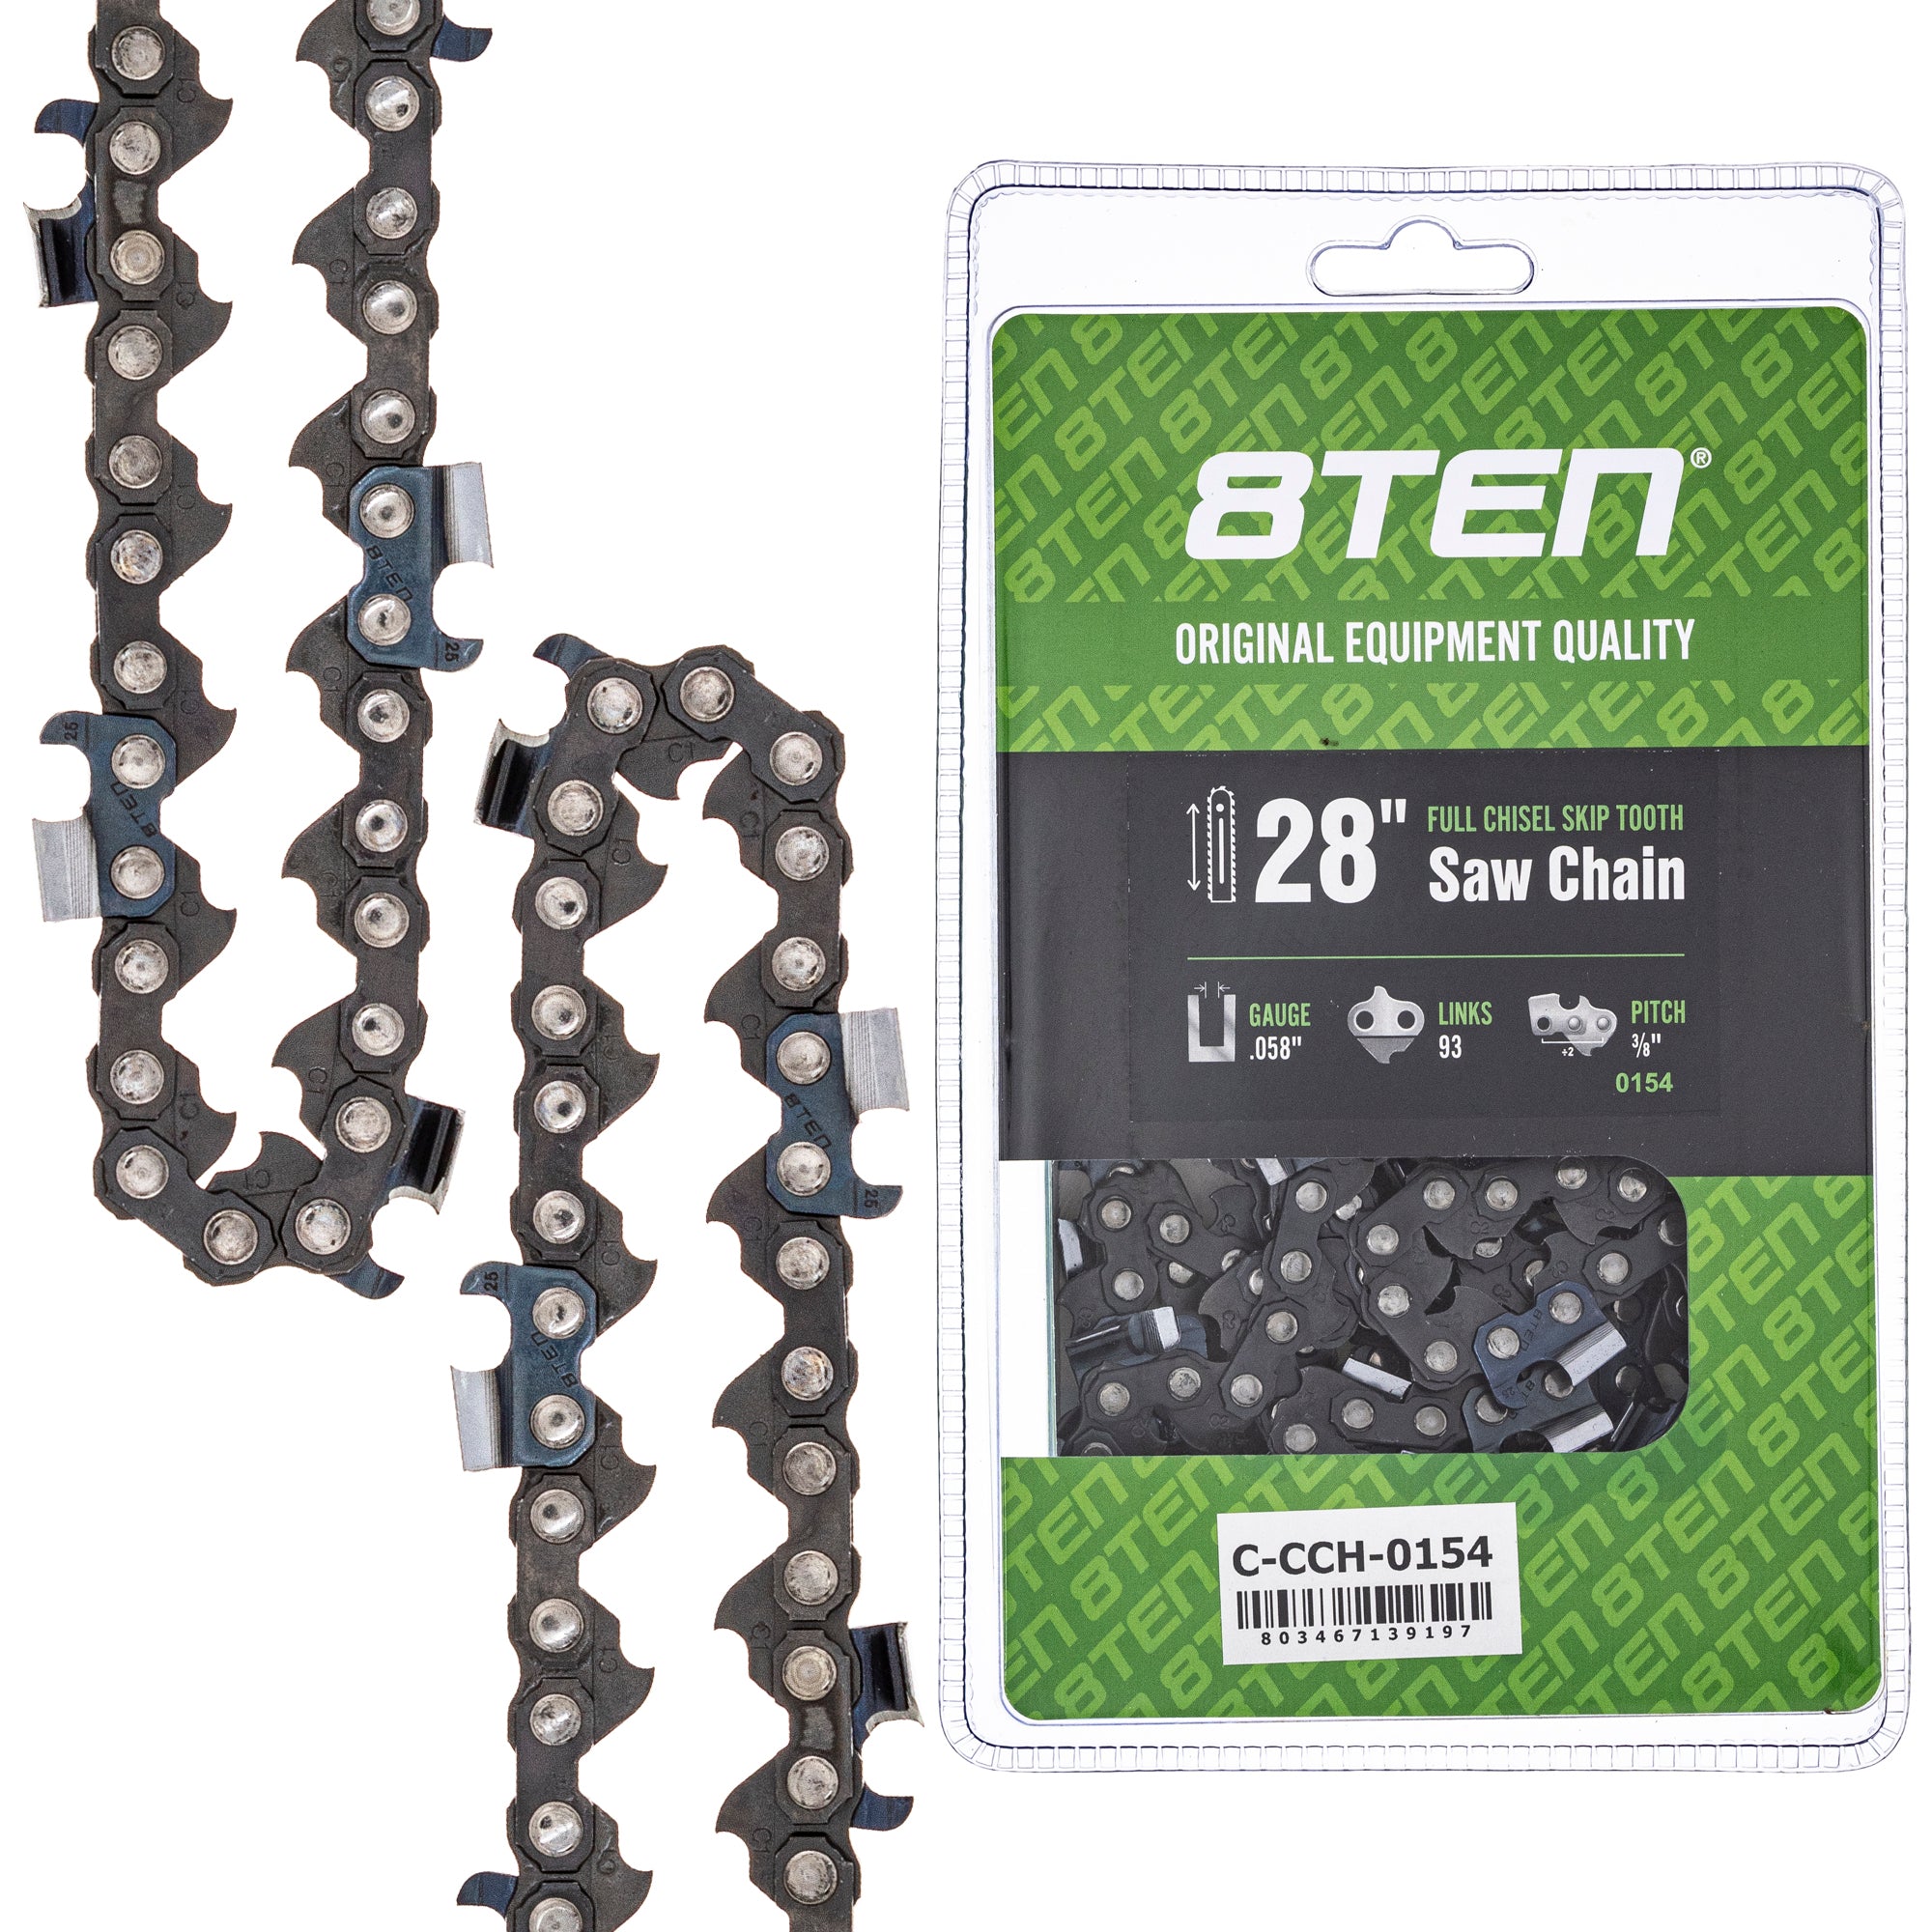 Chainsaw Chain 28 Inch .0583/8 93DL for zOTHER Oregon DCS9010FL DCS9000 DCS7901 DCS7301 8TEN 810-CCC2376H